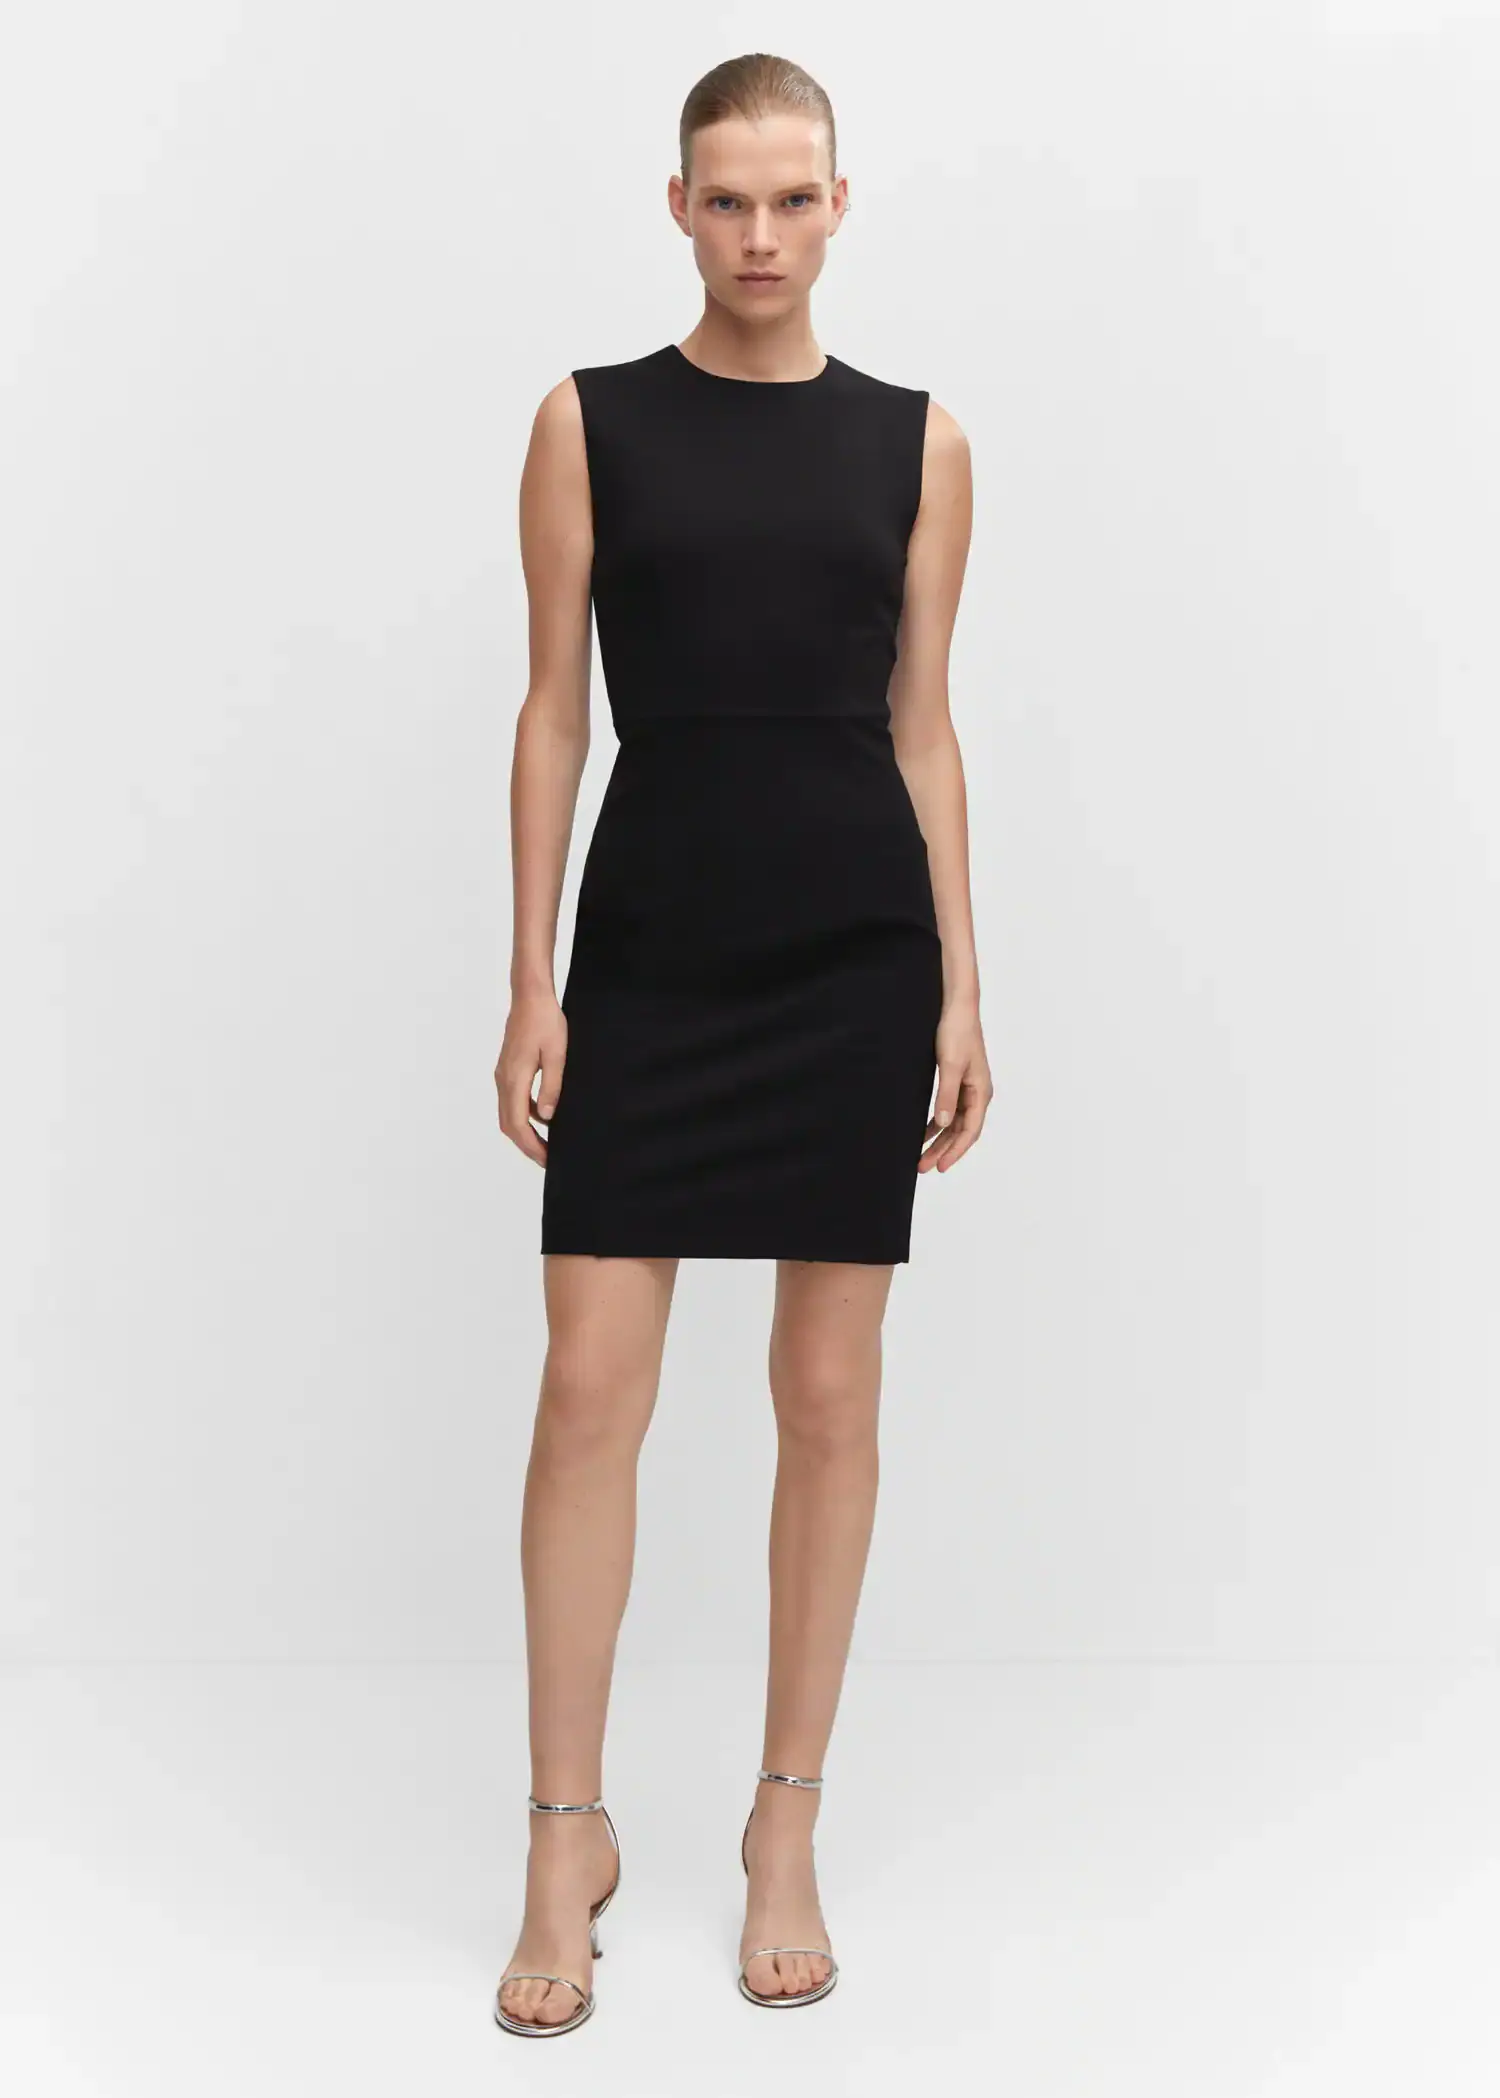 Mango Roma-knit sleeveless dress. a woman wearing a black dress standing in front of a white wall. 